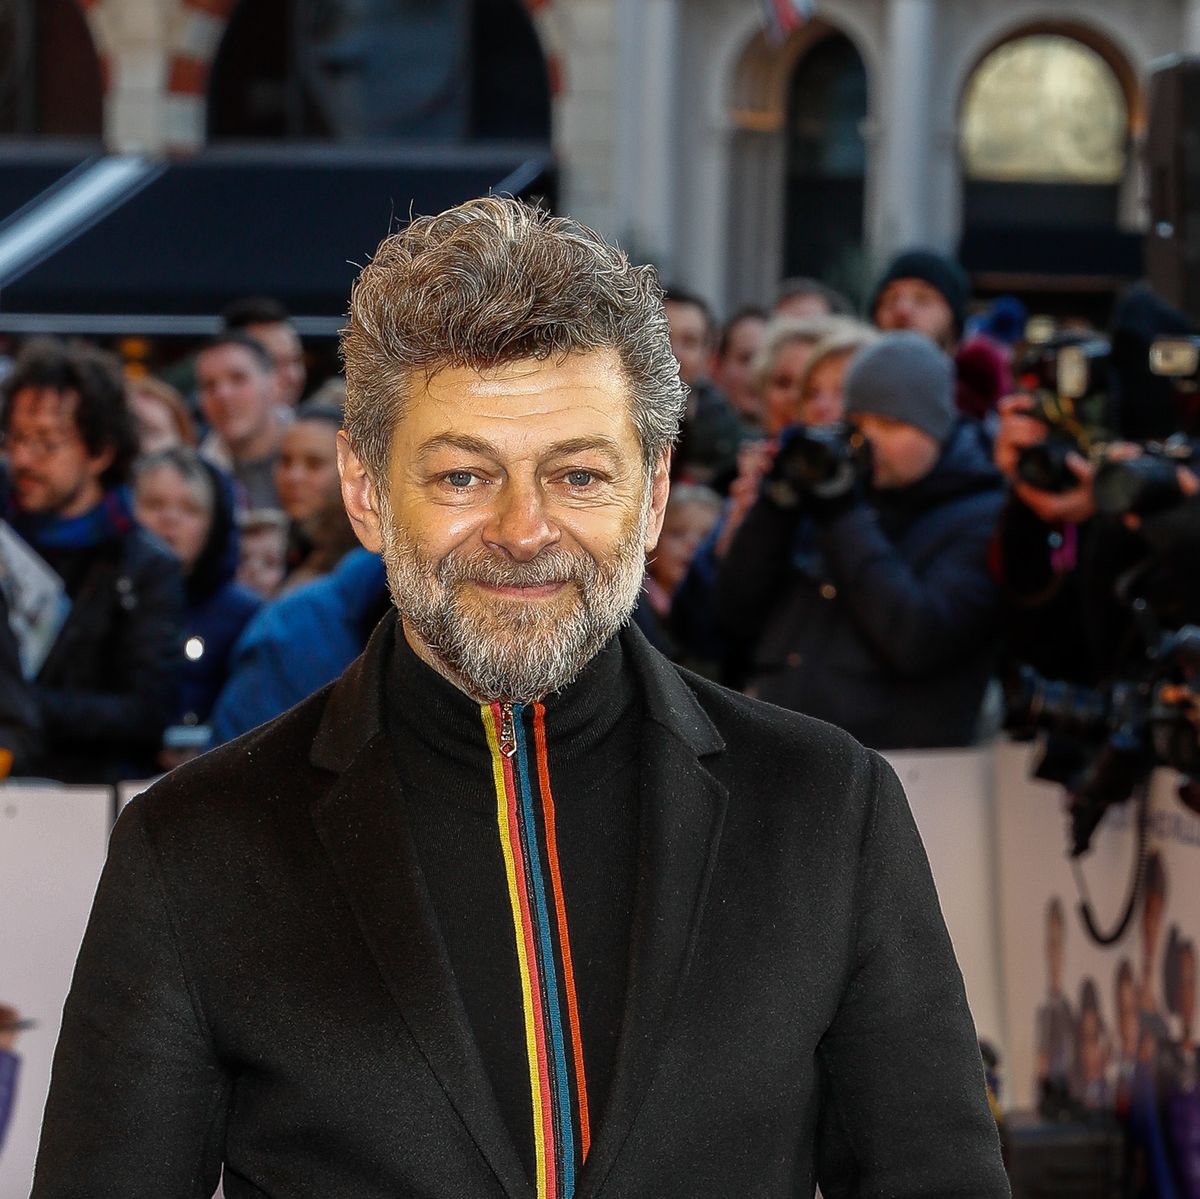 The Strange Way Lord Of The Rings' Andy Serkis Prepared To Play Gollum